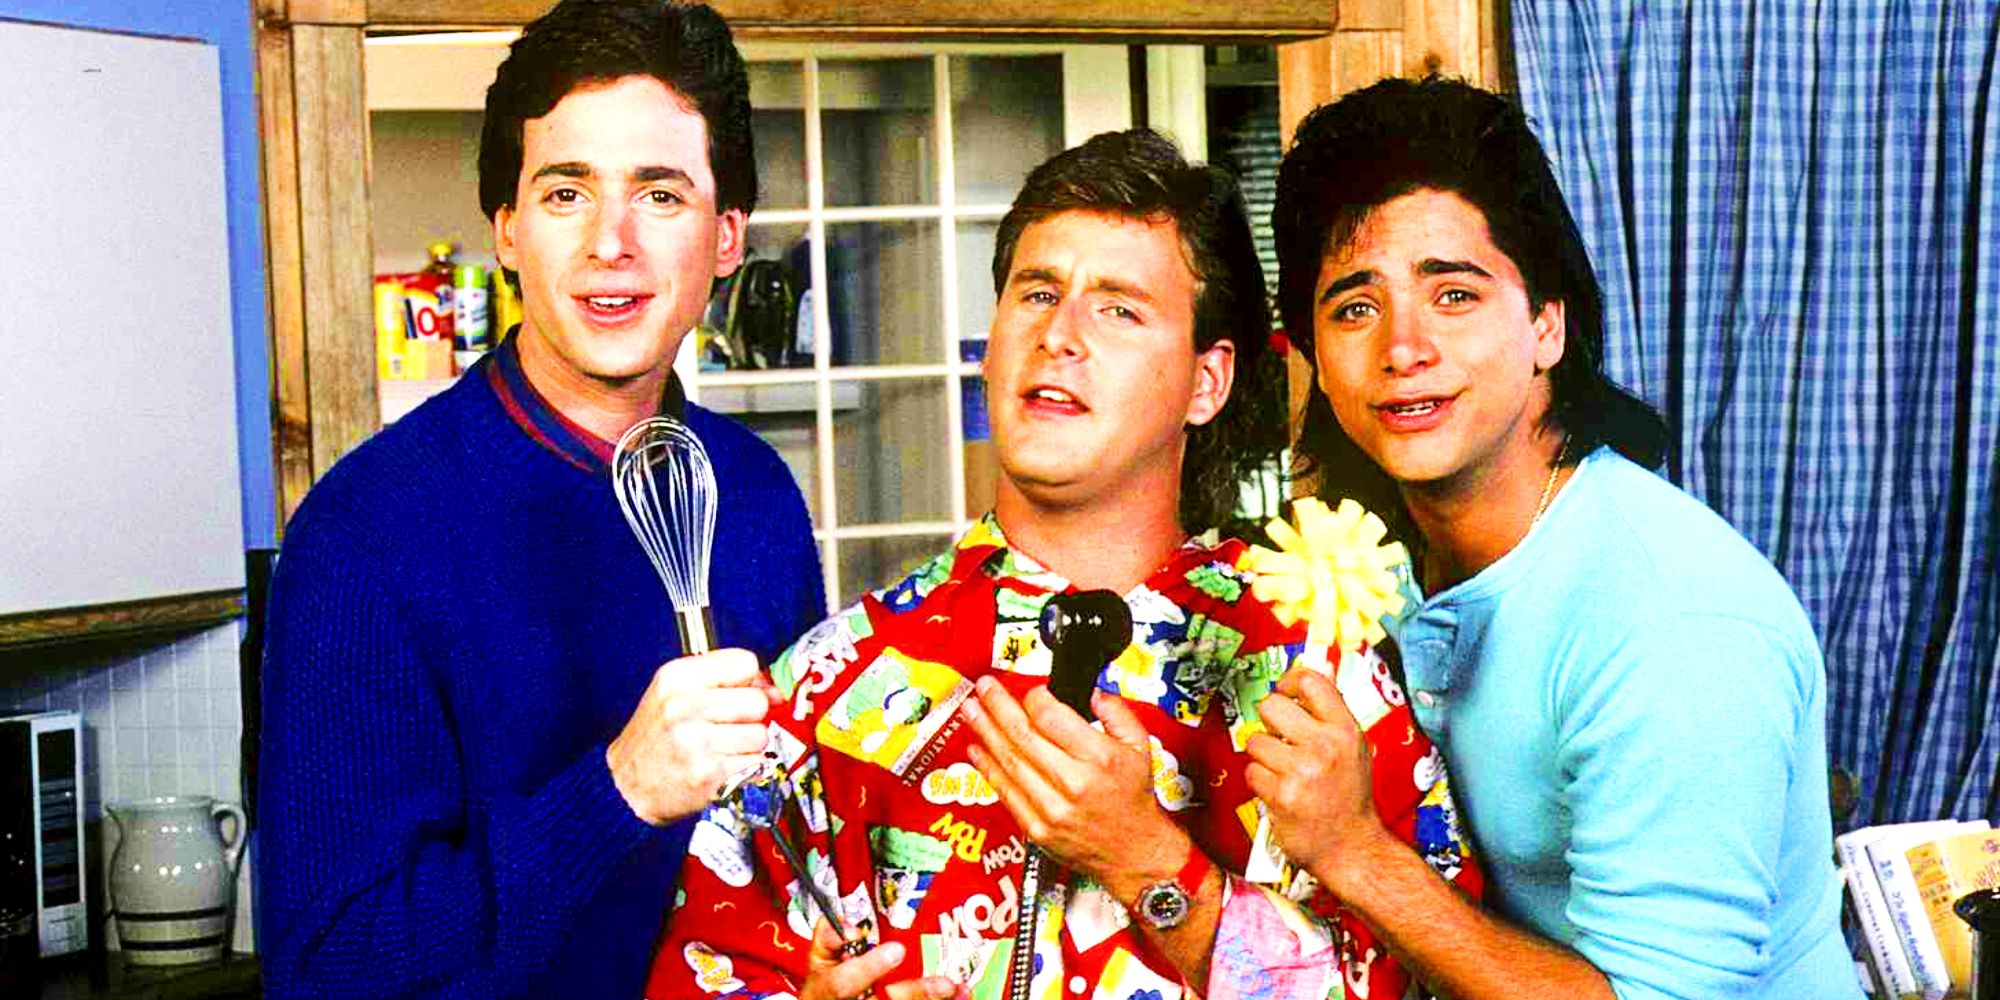 Full House Star Recalls His Surprise Audition As Danny Tanner (Which He Totally Bombed)